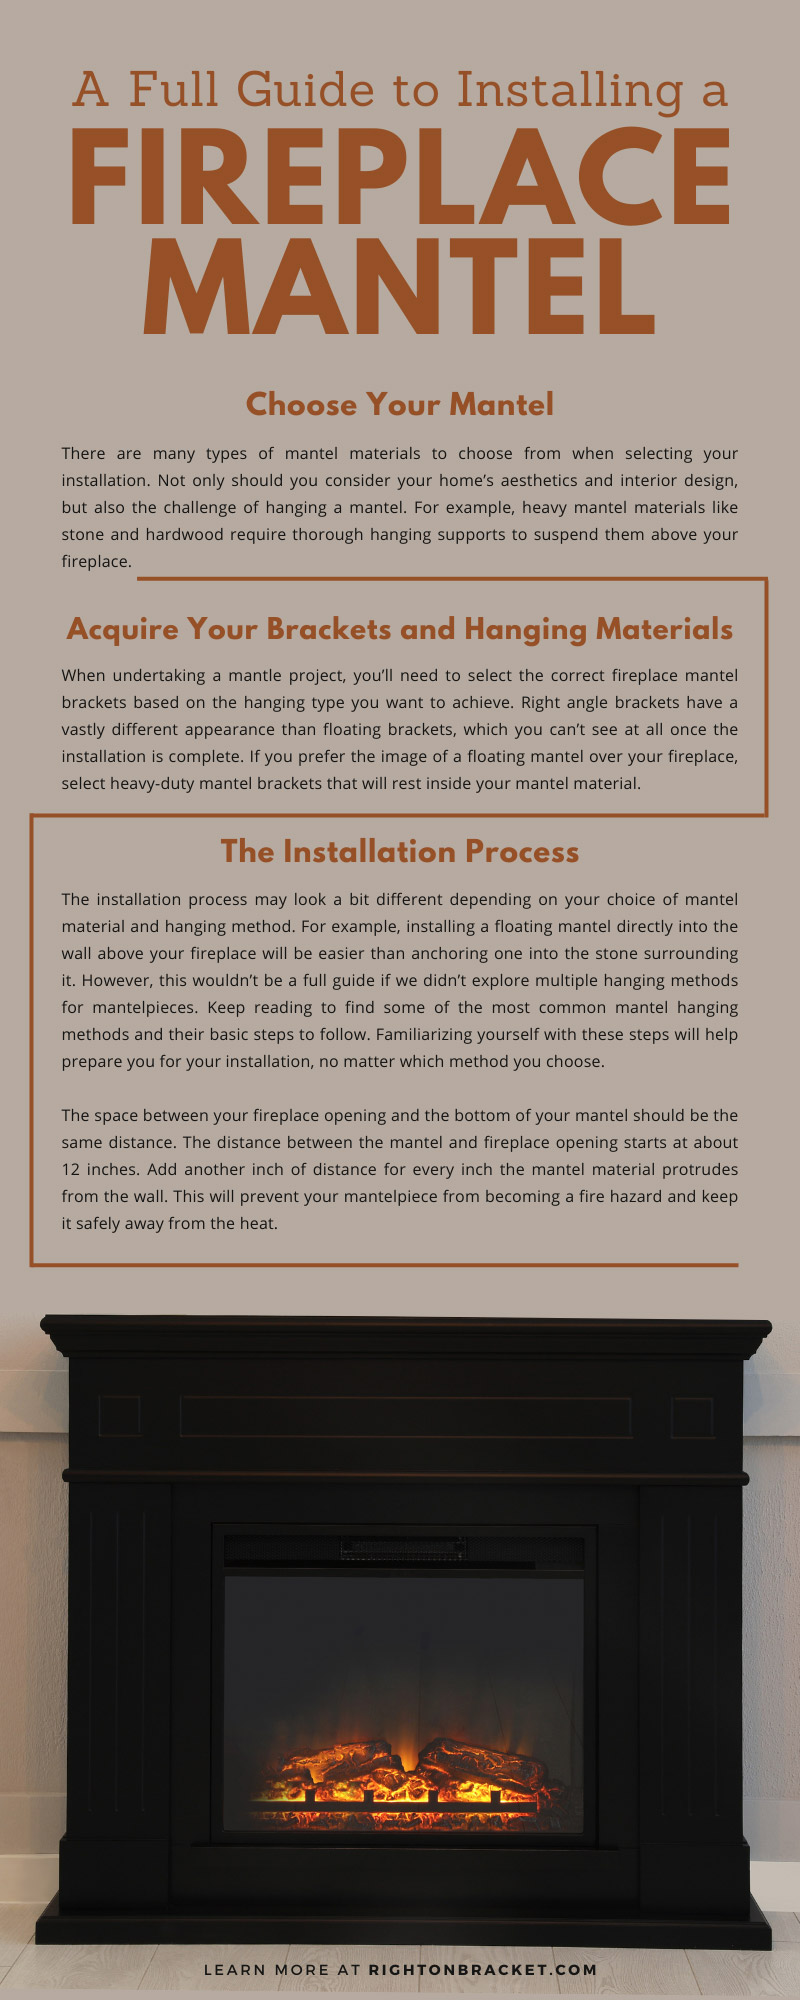 A Full Guide to Installing a Fireplace Mantel